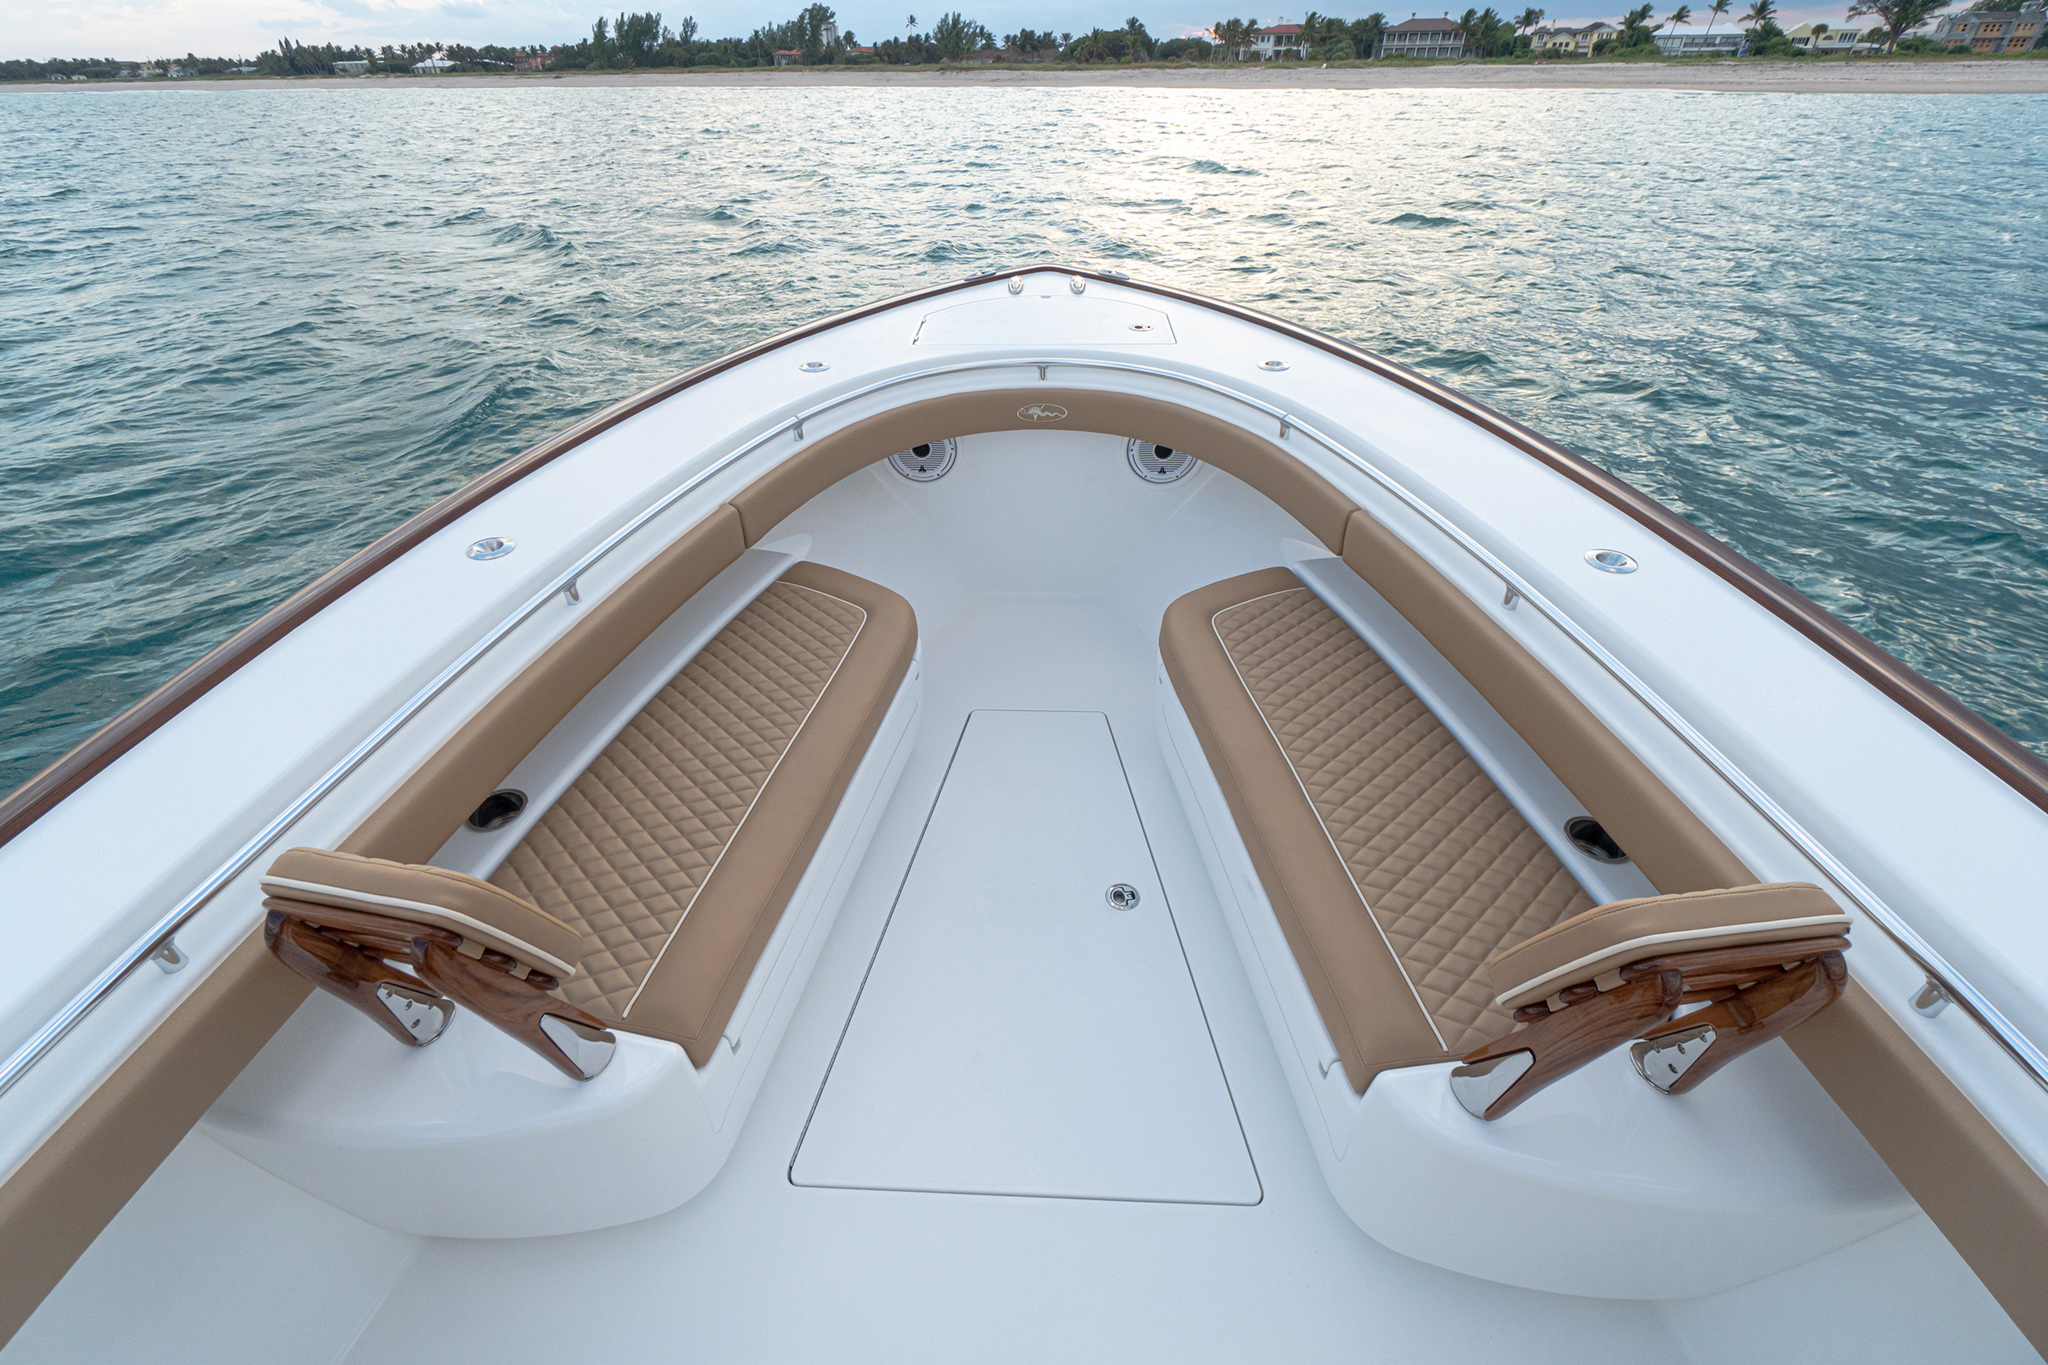 Available forward seating with Release Marine teak backrests; full forward bow access.